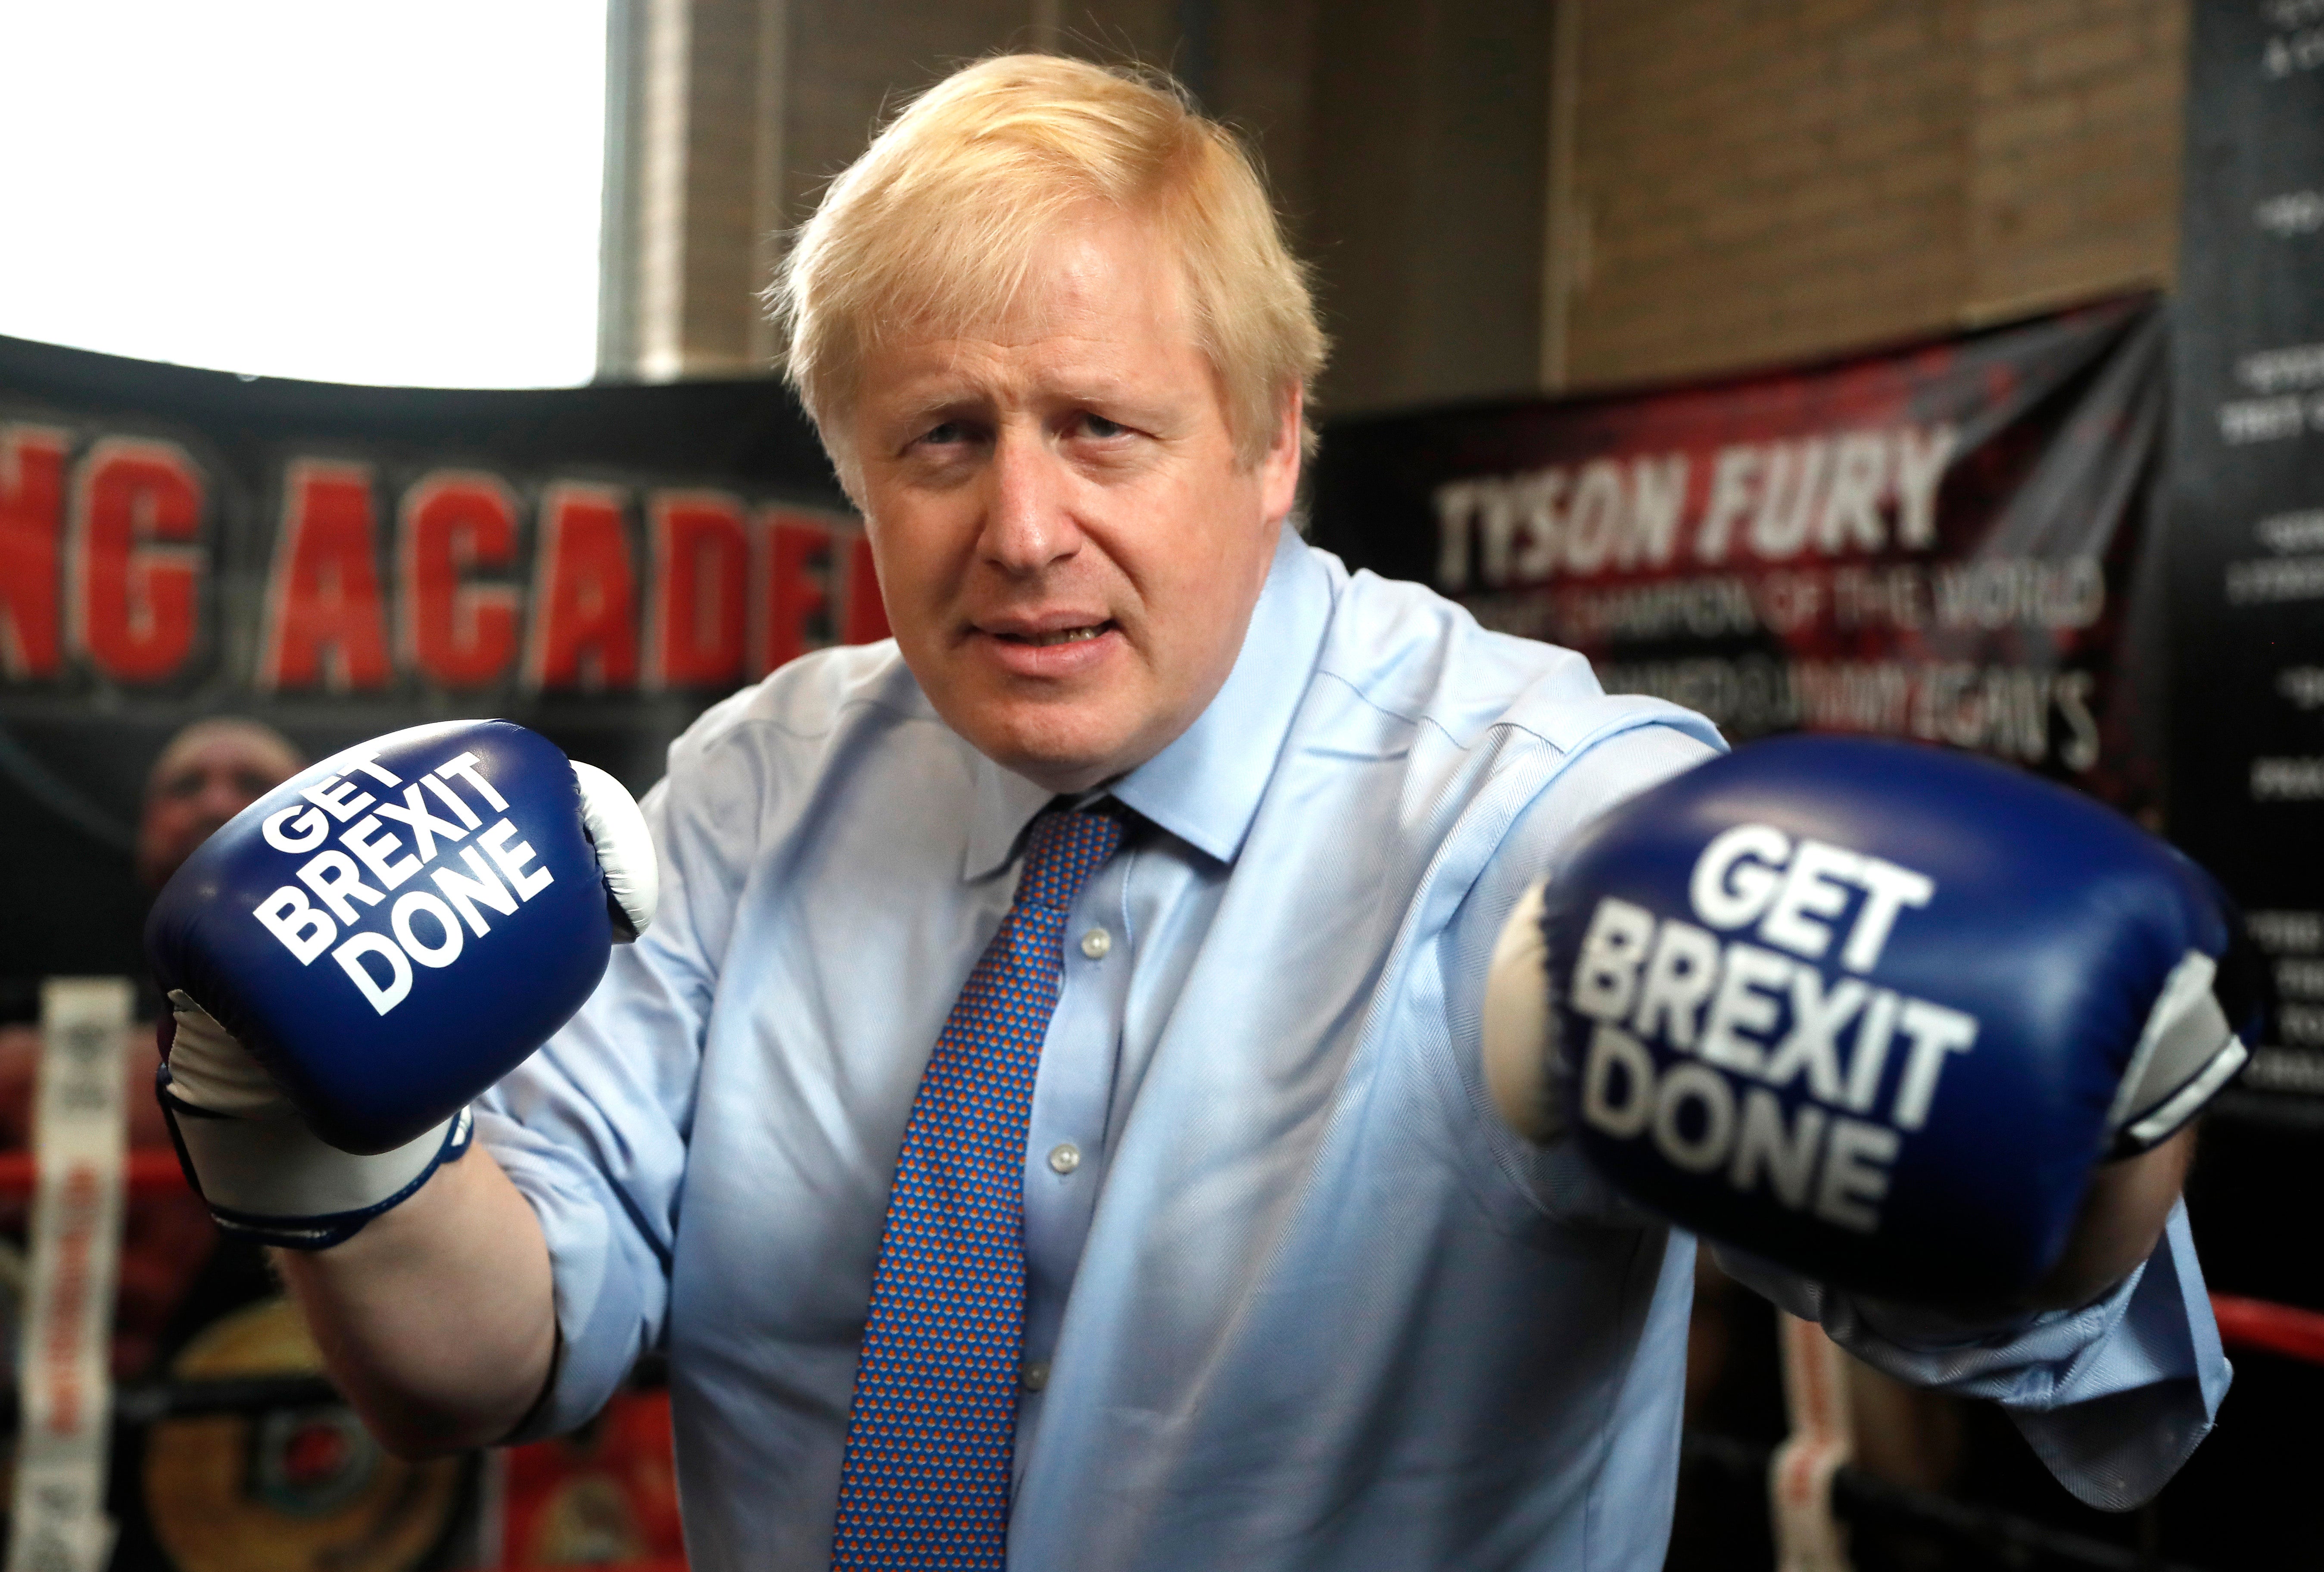 The voters wanted Boris to ‘get Brexit done’